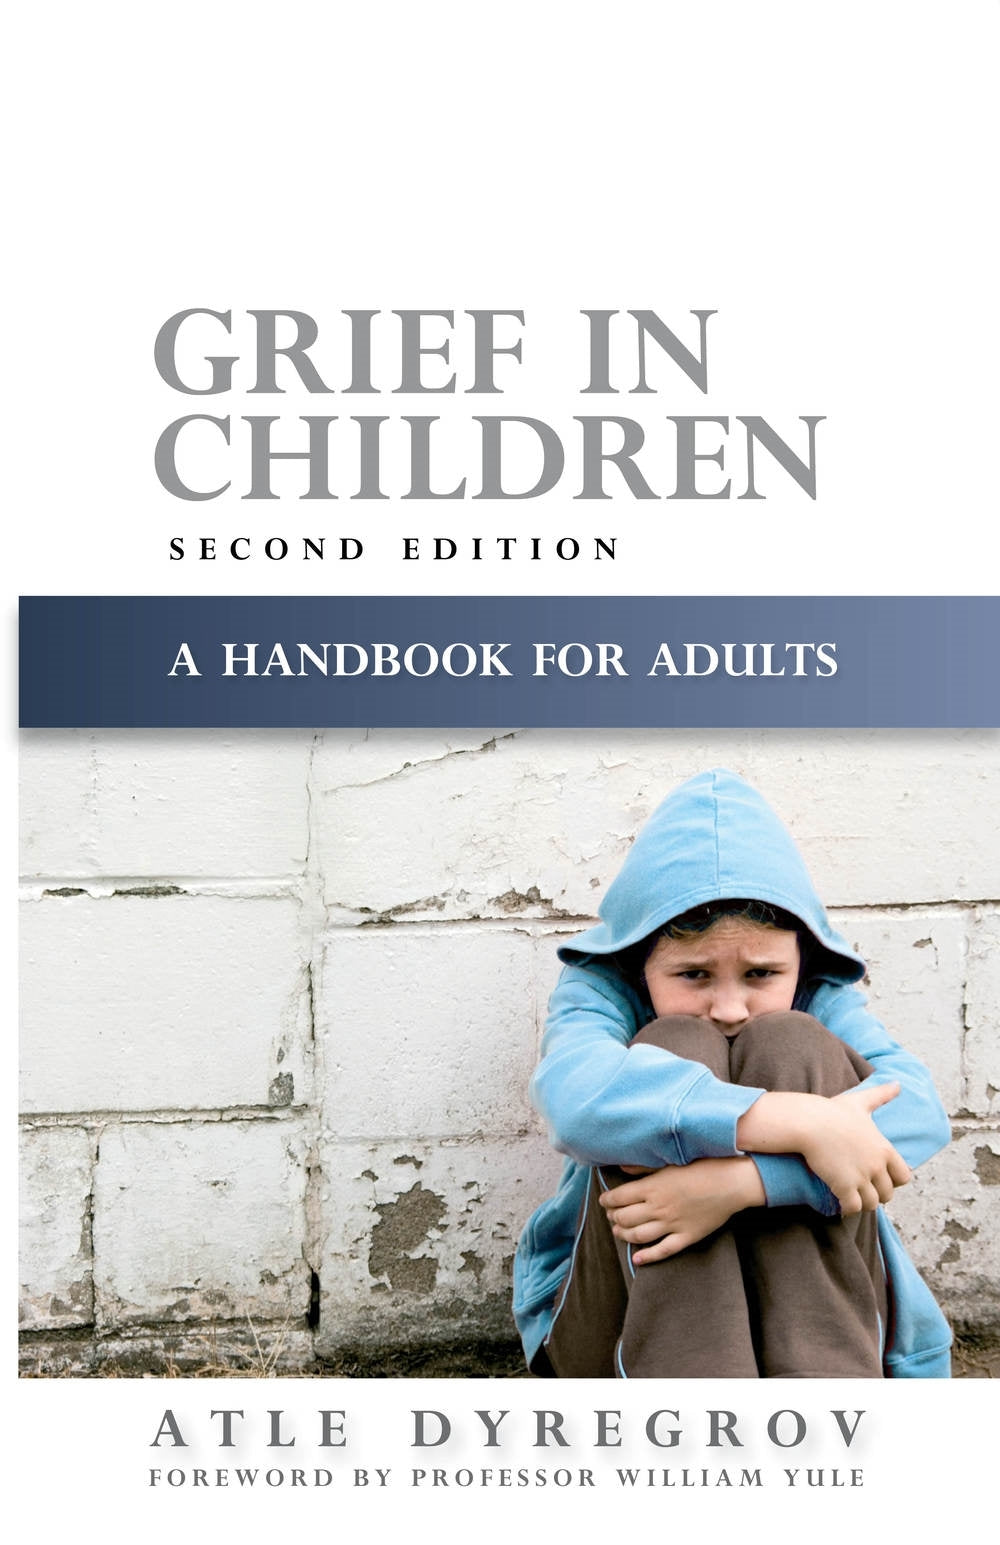 Grief in Children by No Author Listed, Atle Dyregrov, William Yule